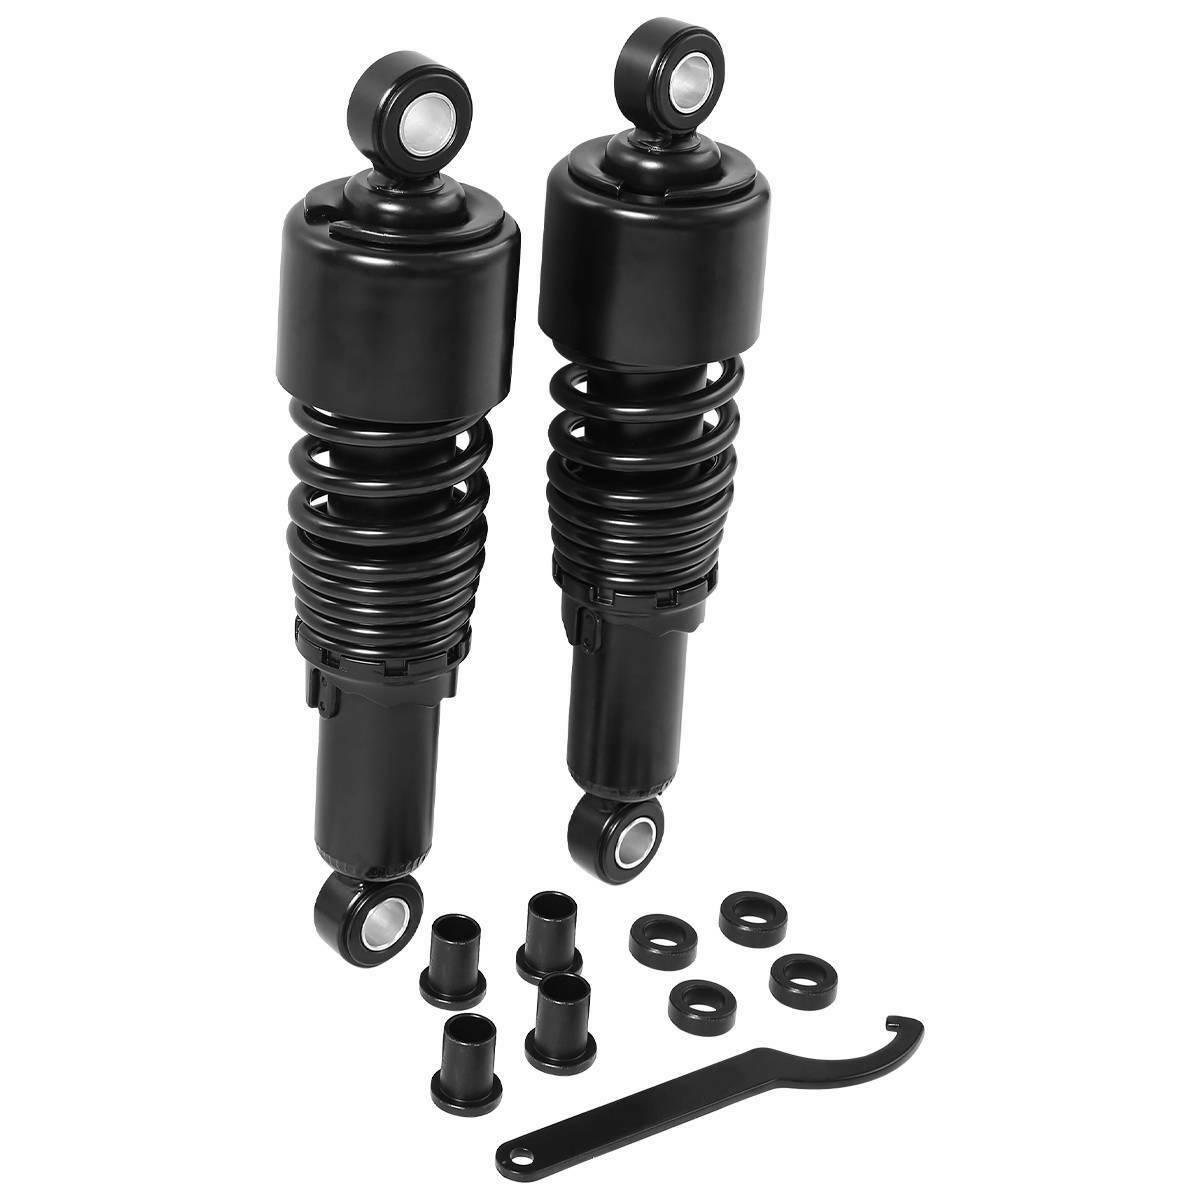 10.5'' 267mm Rear Shocks Suspension Fit For Harley Sportster XL1200 Forty Eight - Moto Life Products